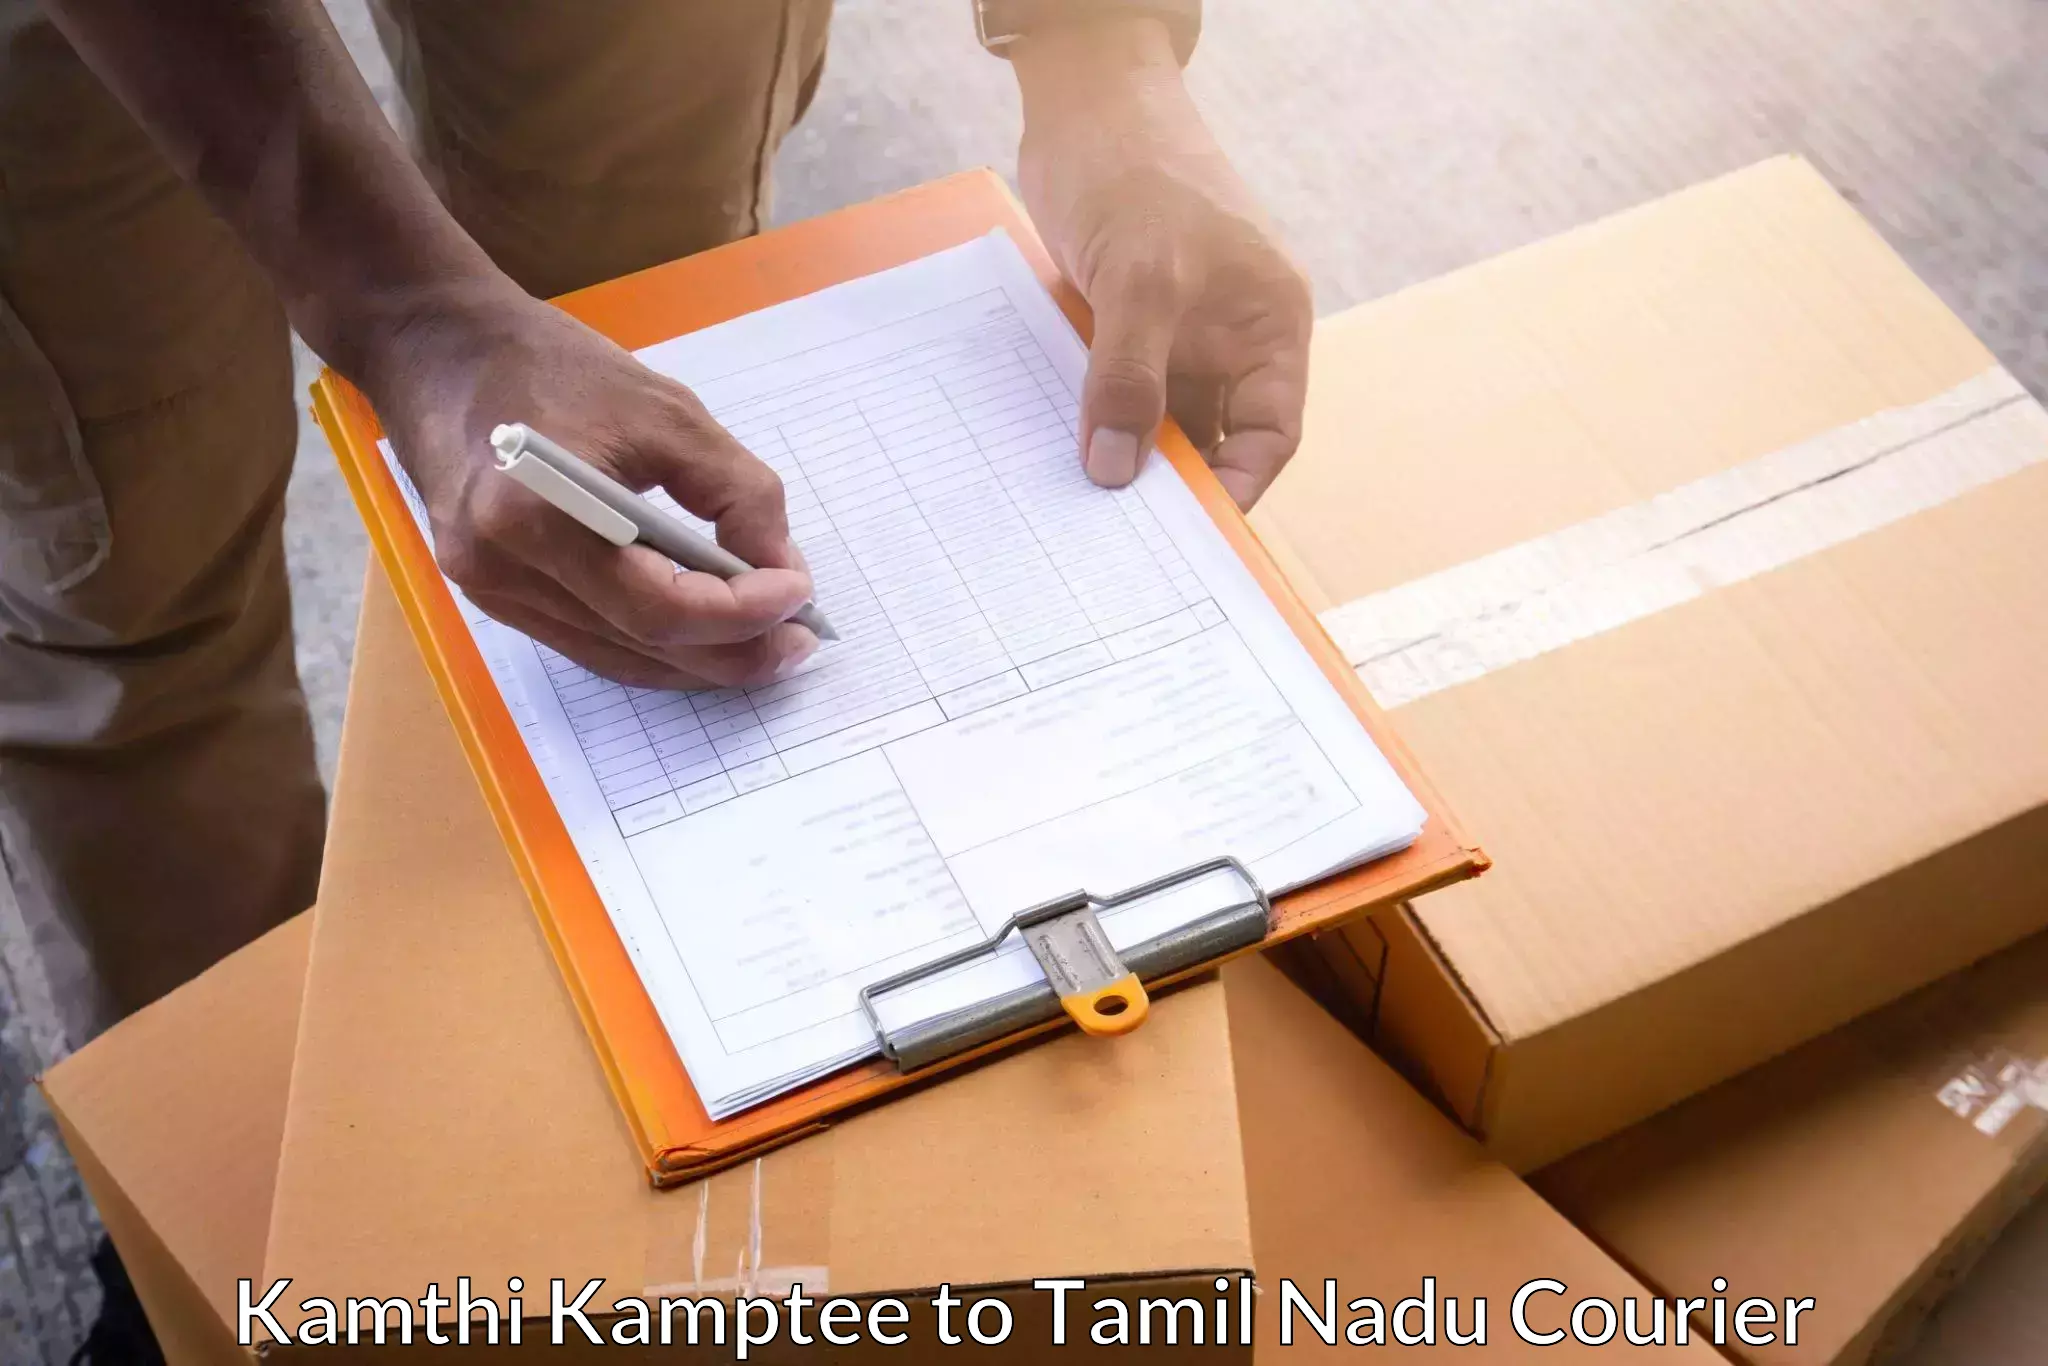 Secure freight services Kamthi Kamptee to Vriddhachalam